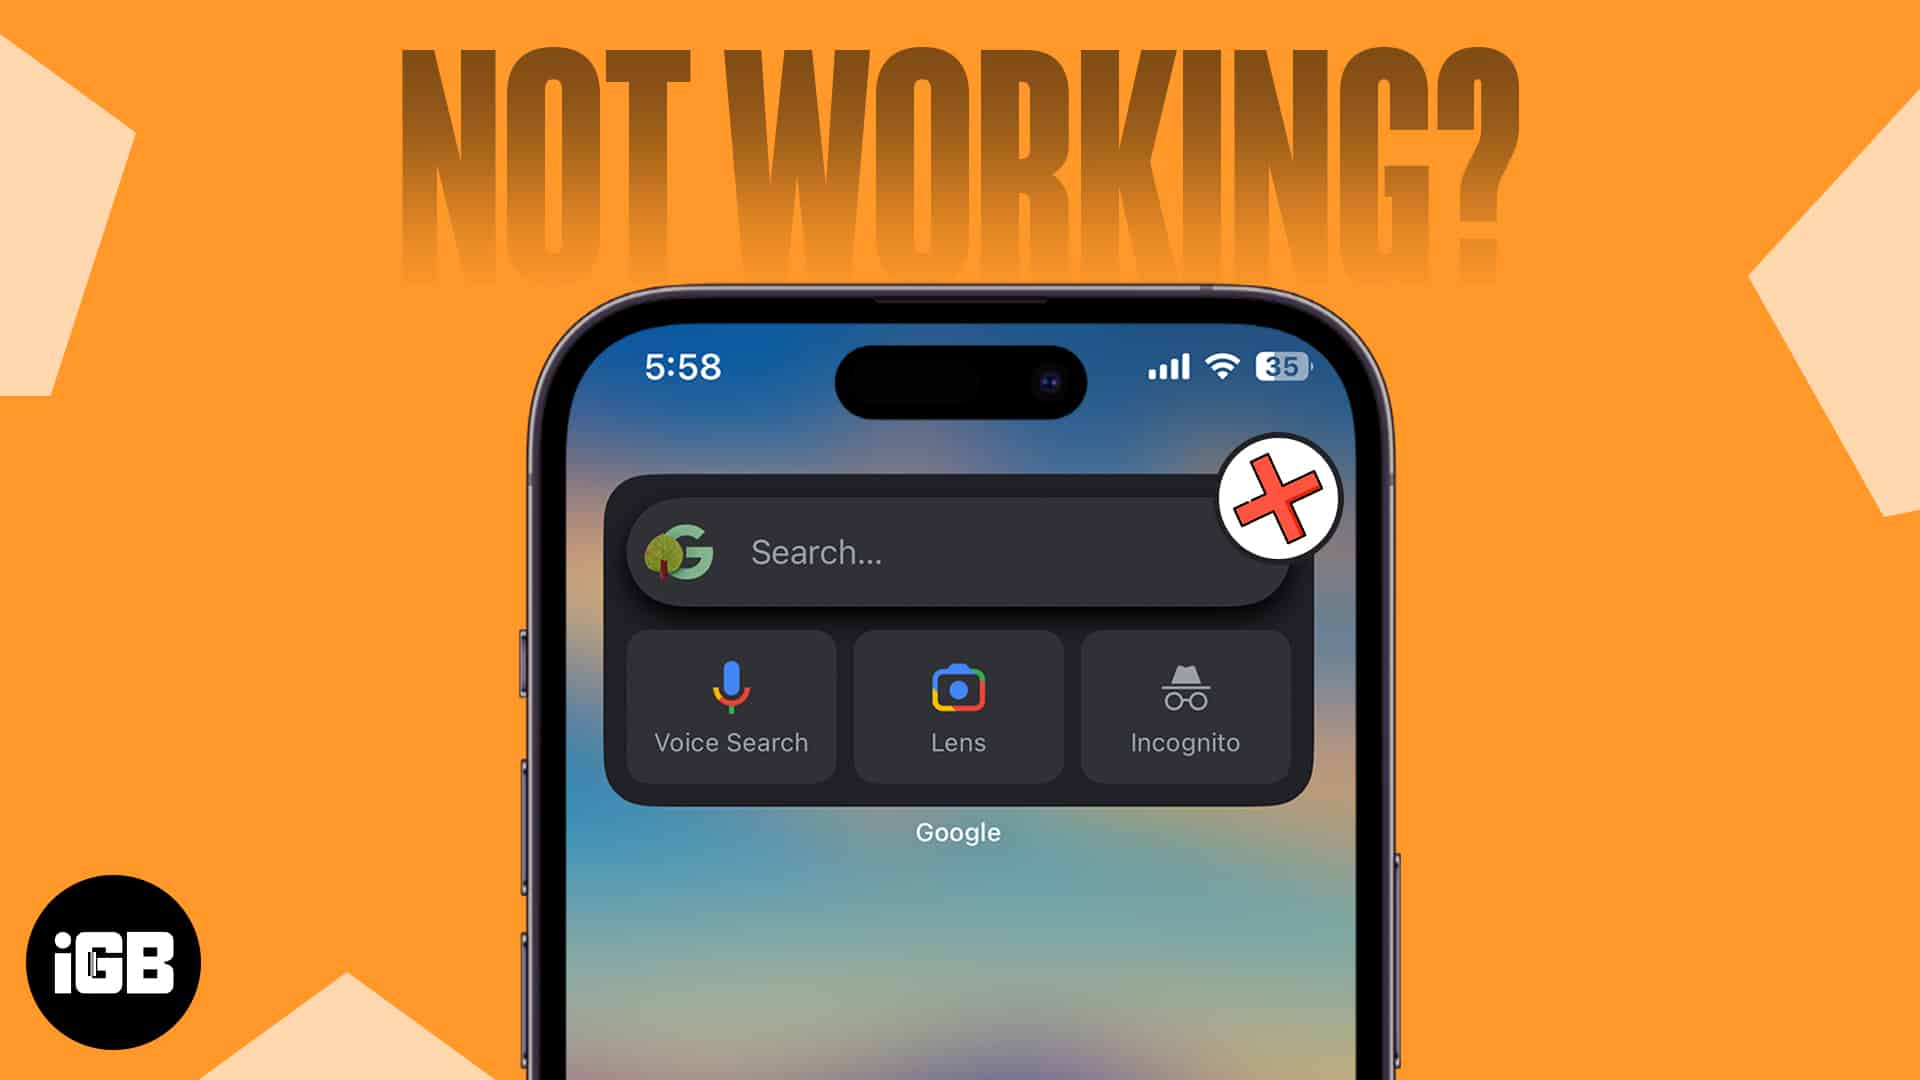 Why doesn't Google search work on my iPhone?